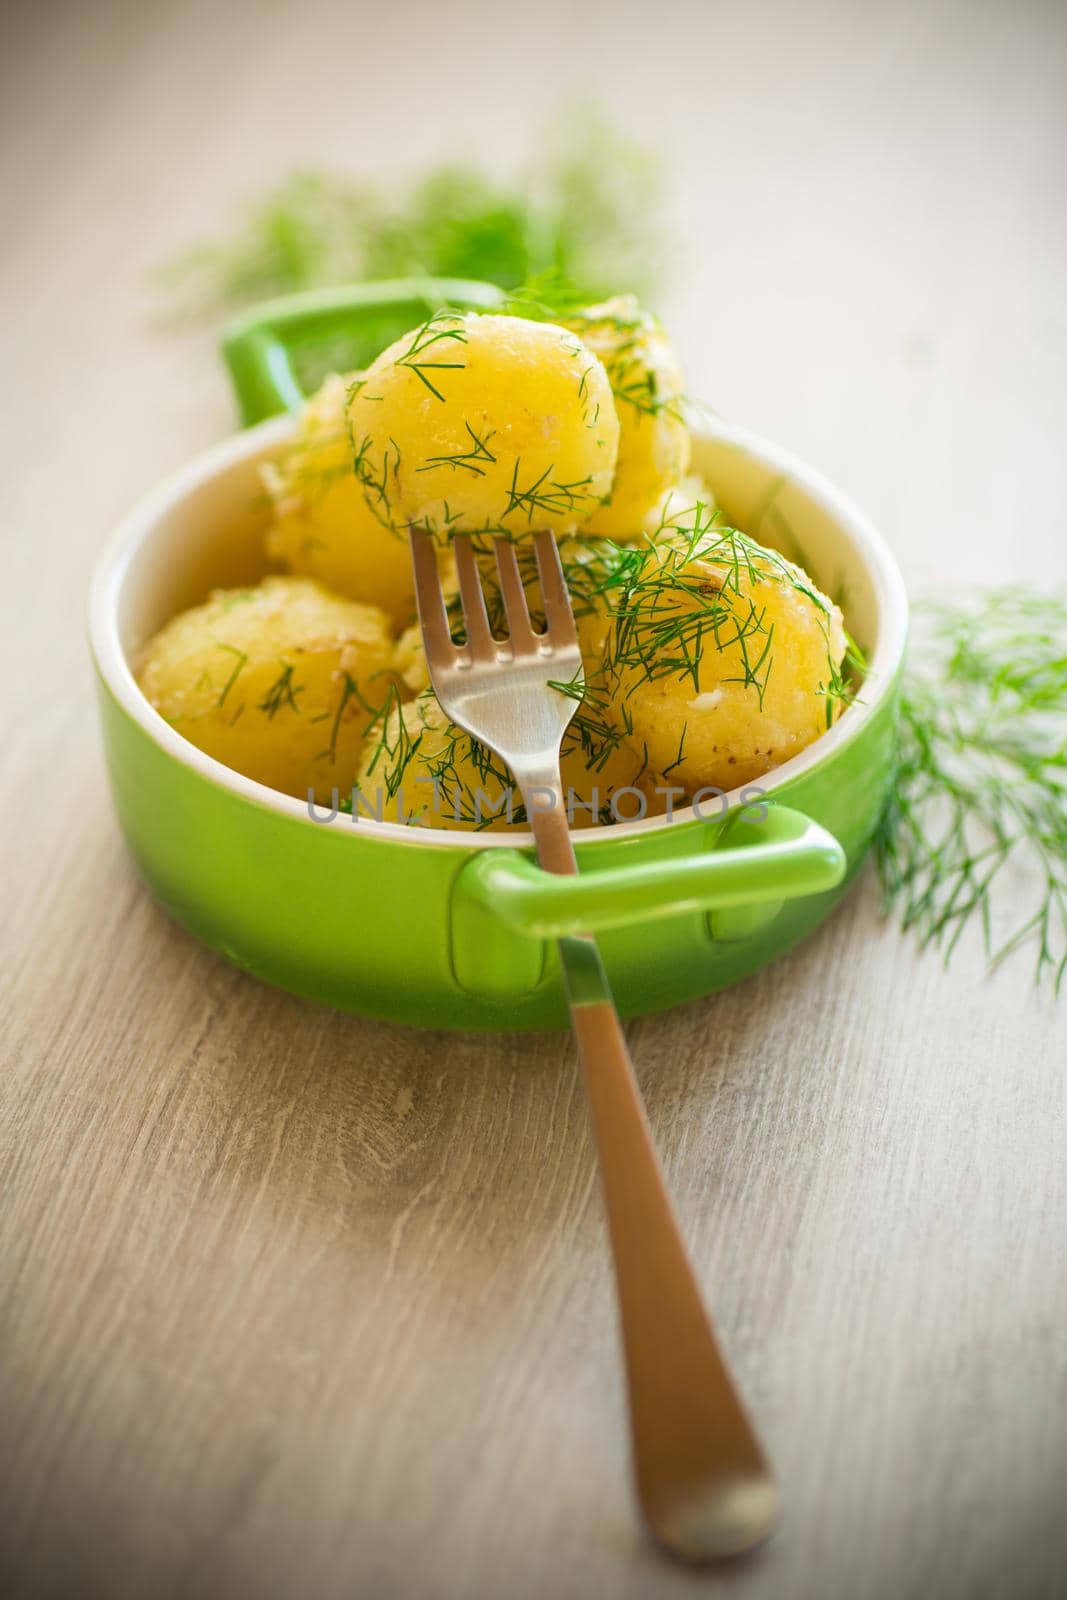 boiled early potatoes with butter and fresh dill in a bowl on a wooden table